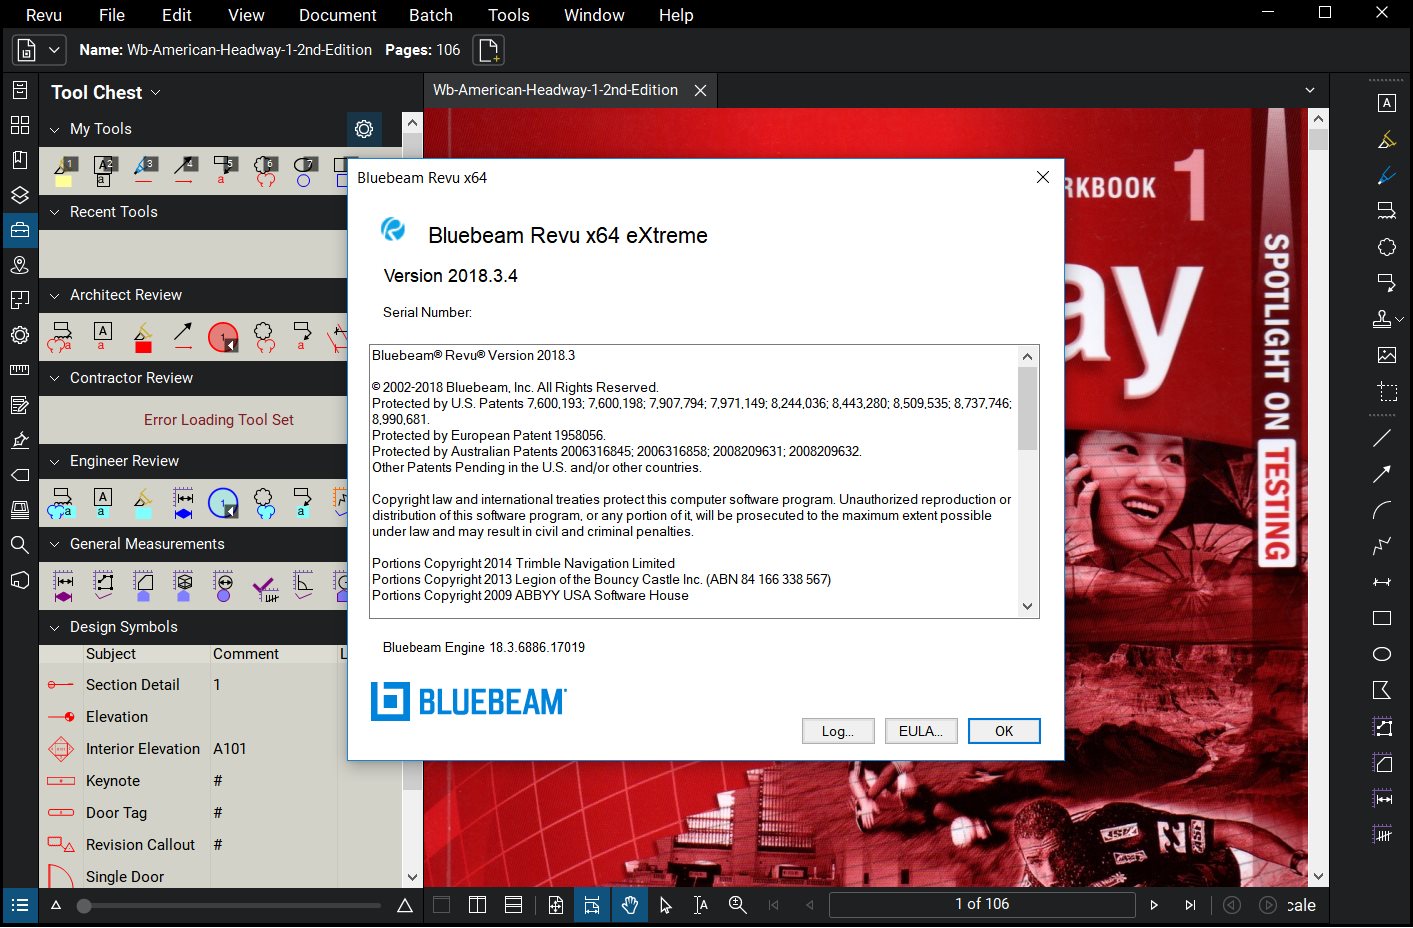 download bluebeam extreme 2020